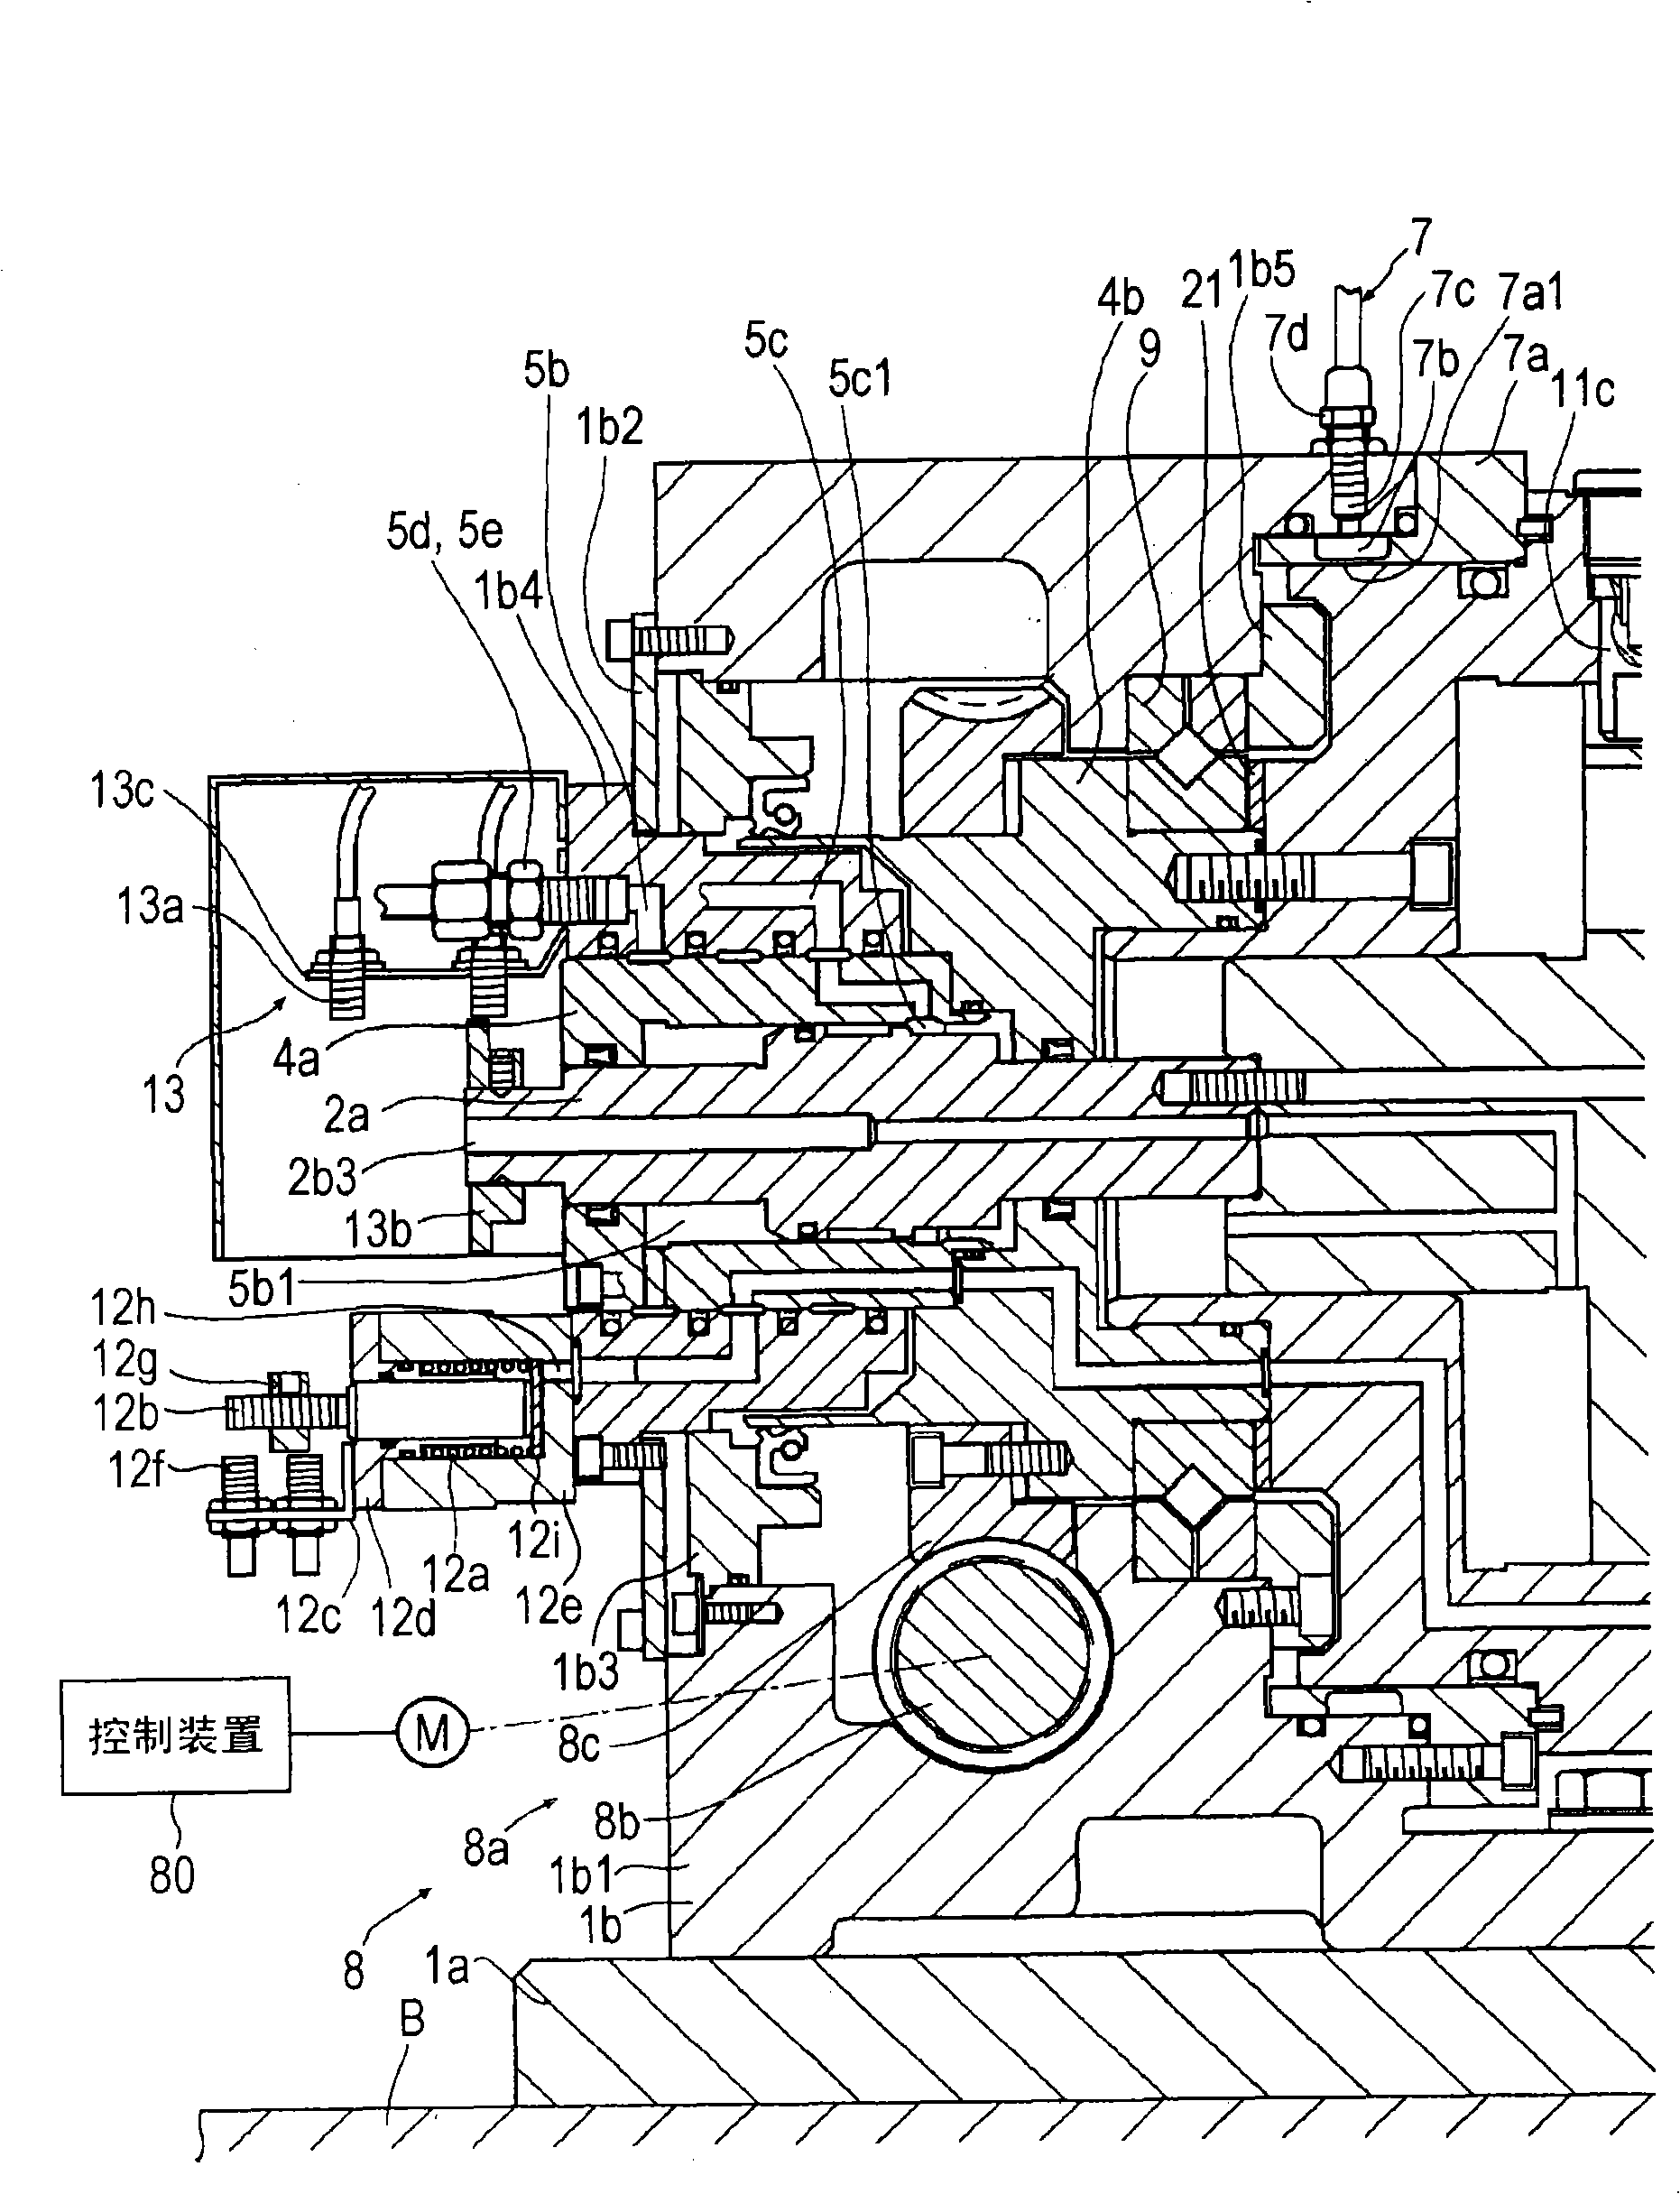 Workpiece support device and rotary indexer